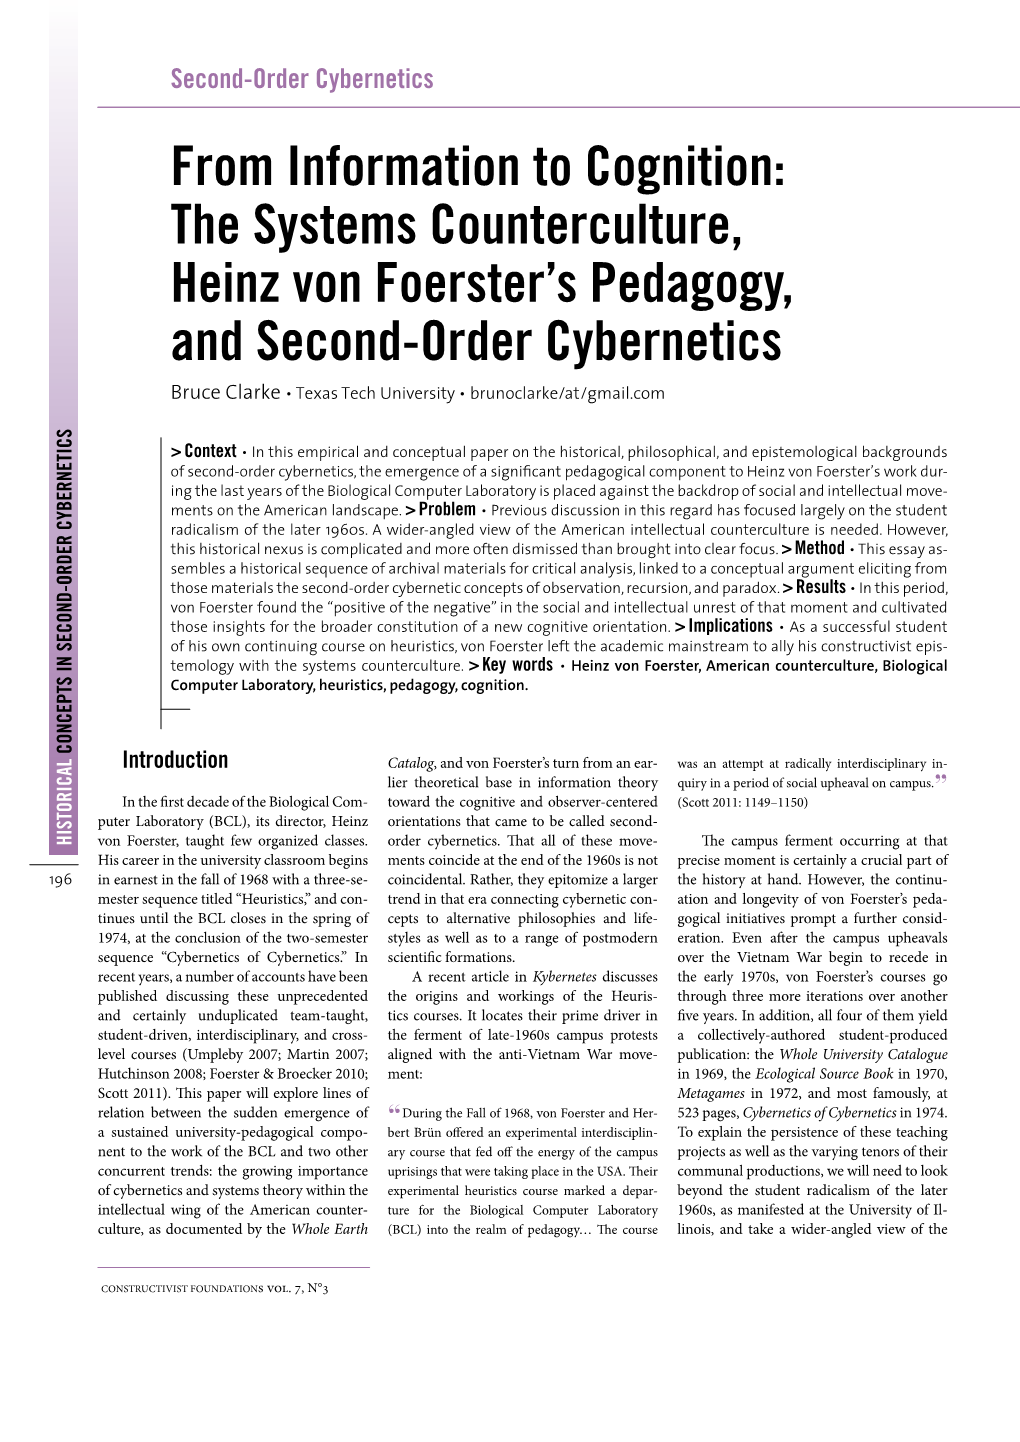 The Systems Counterculture, Heinz Von Foerster's Pedagogy, And